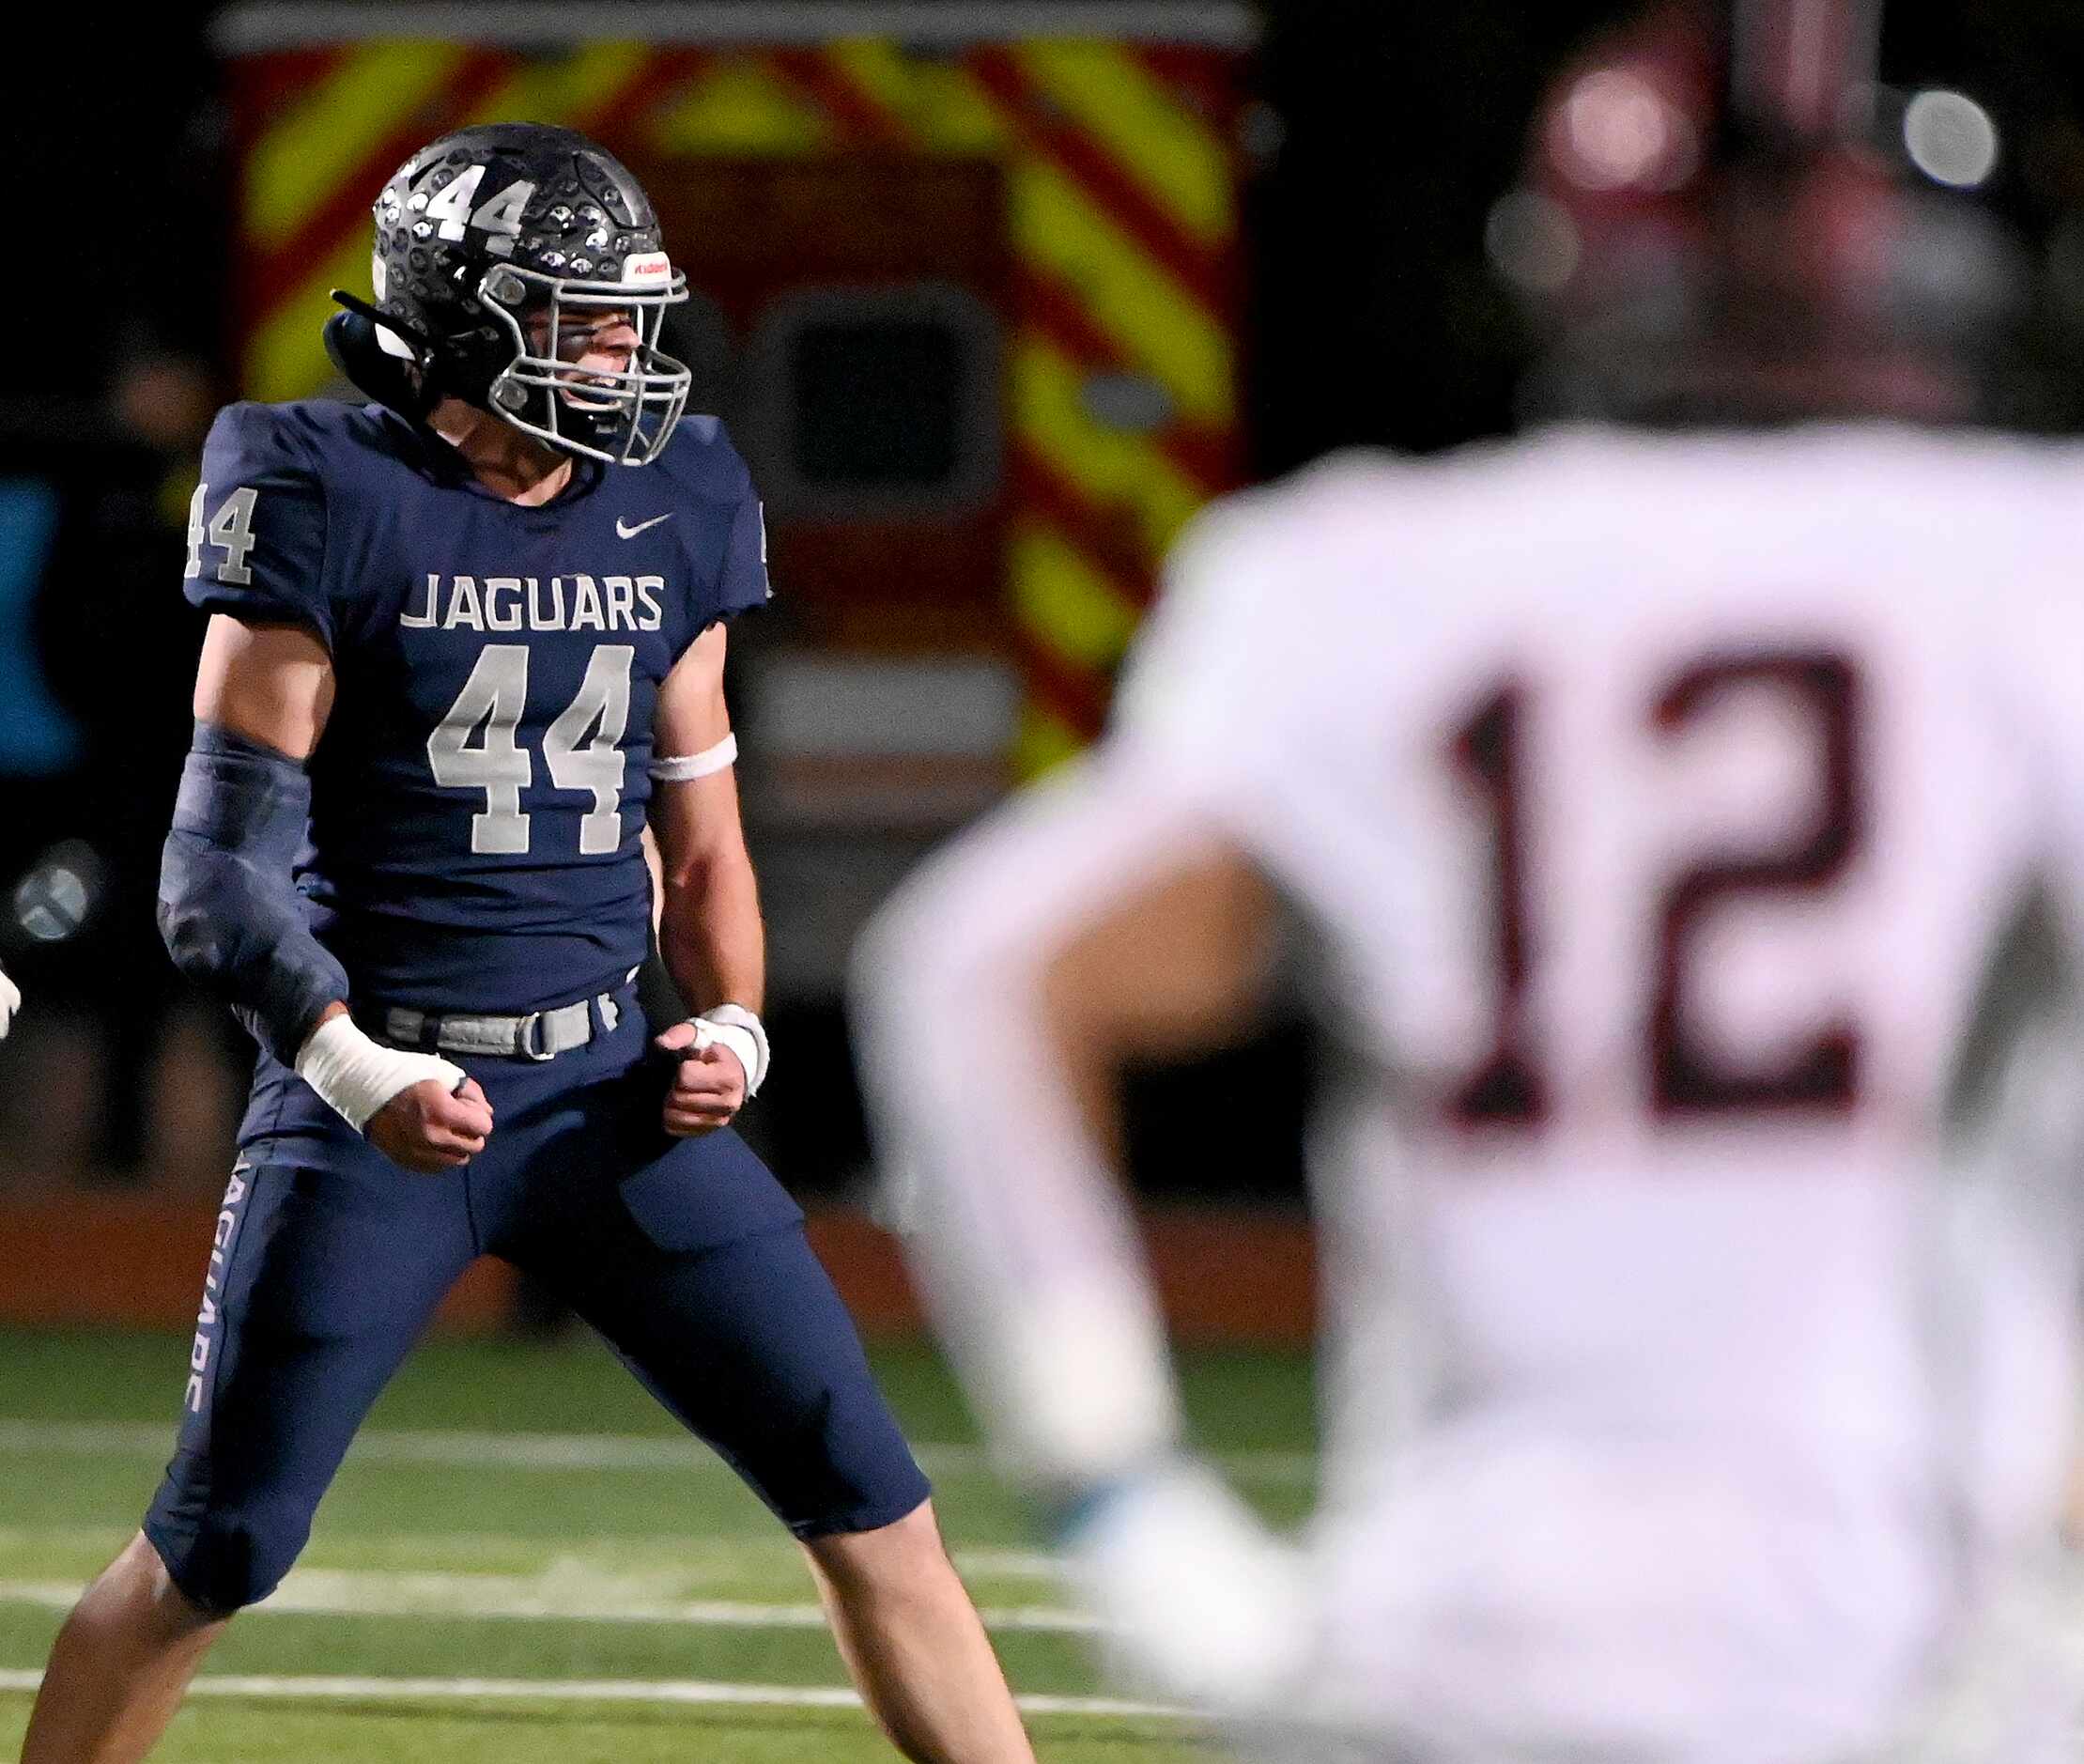 Flower Mound's Ryan Brubaker (44) celebrates after a stop in the first half of a high school...